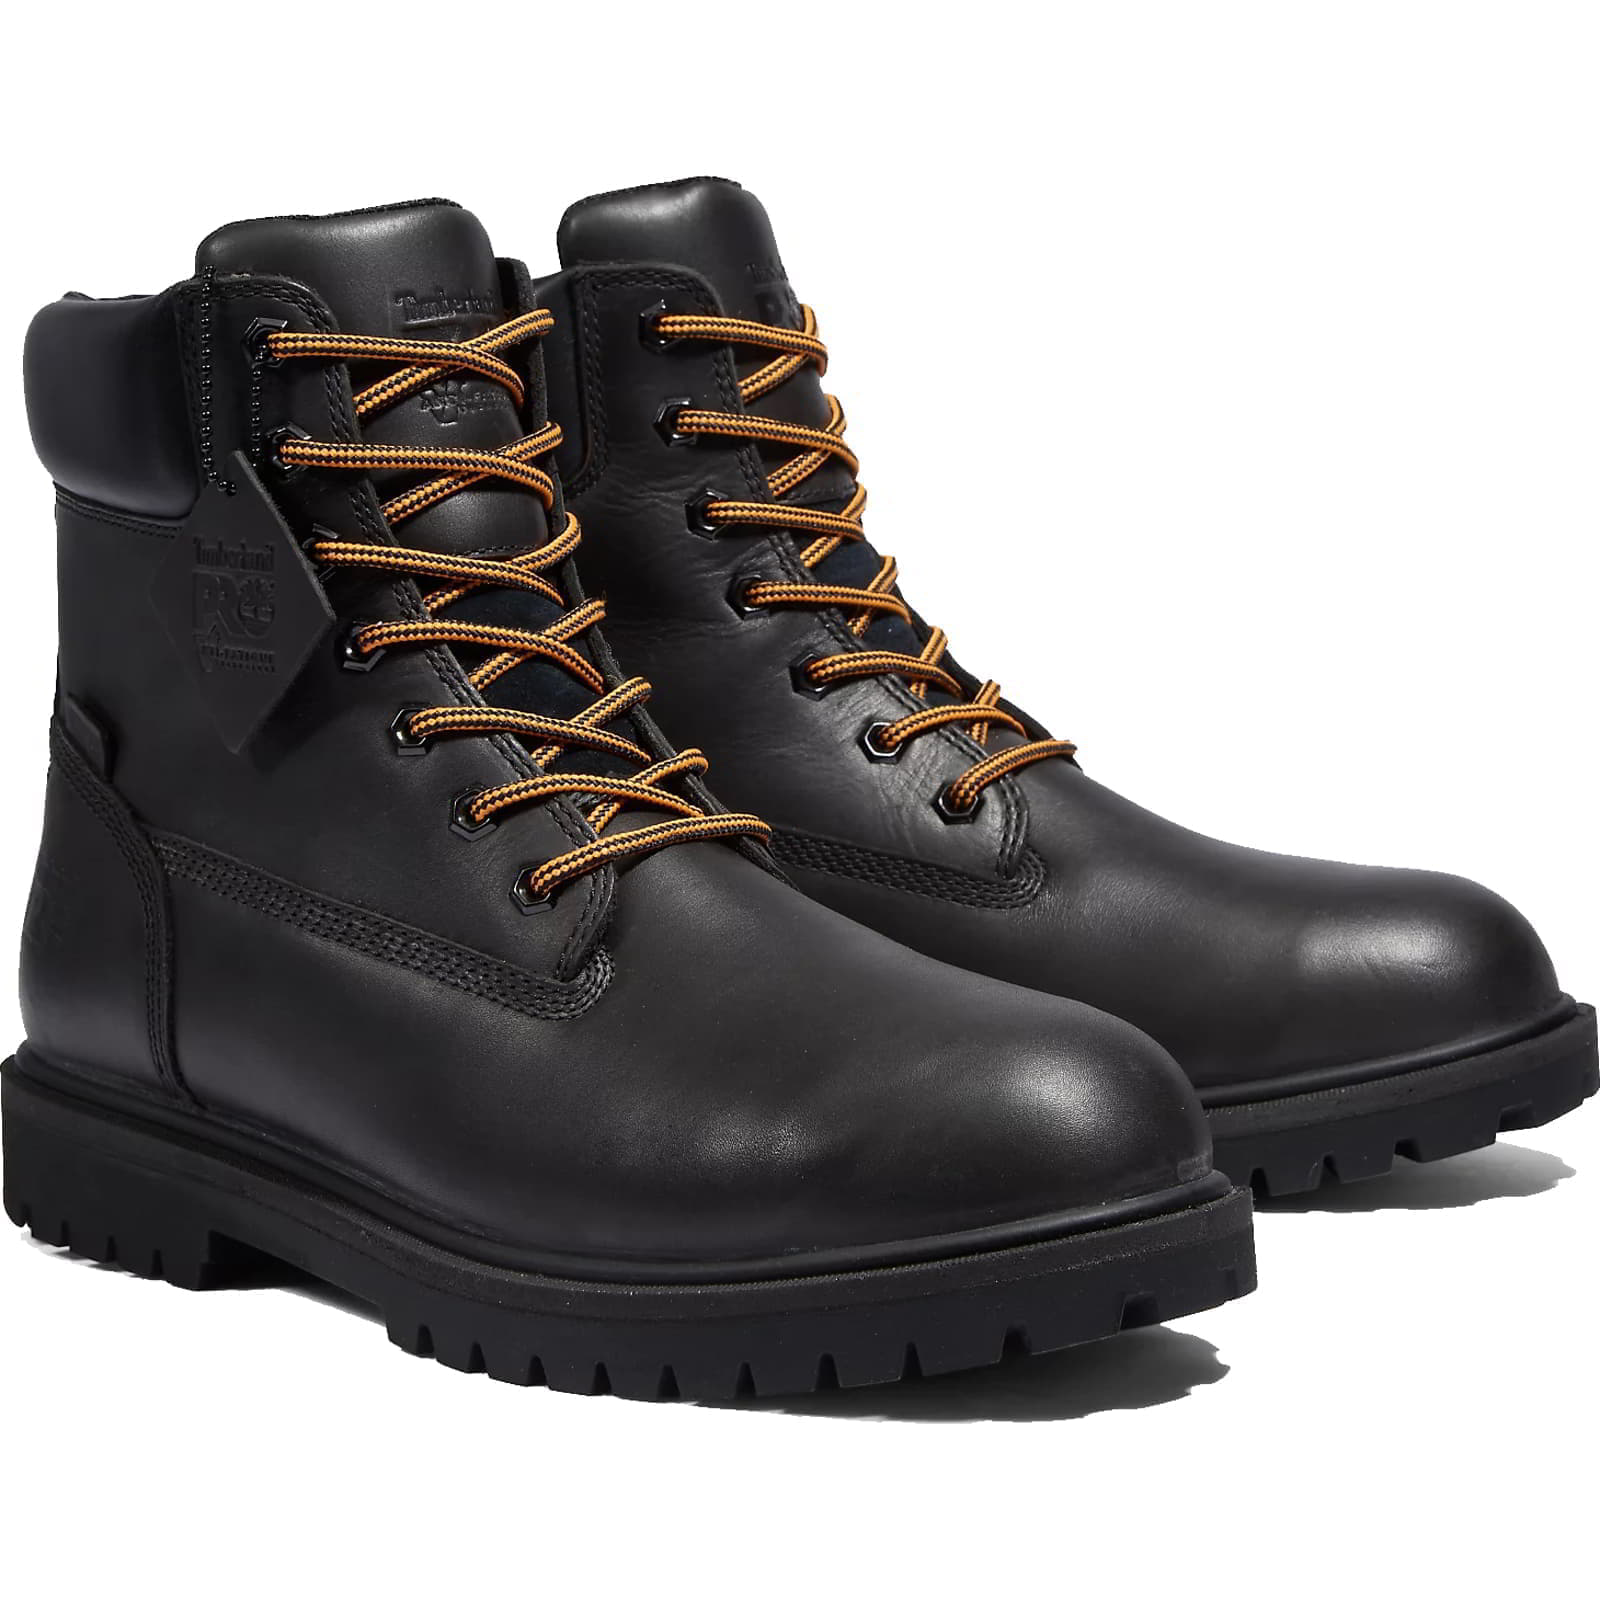 Timberland Pro Mens Iconic Waterproof Safety Toe Cap Work Ankle Boots - UK 13